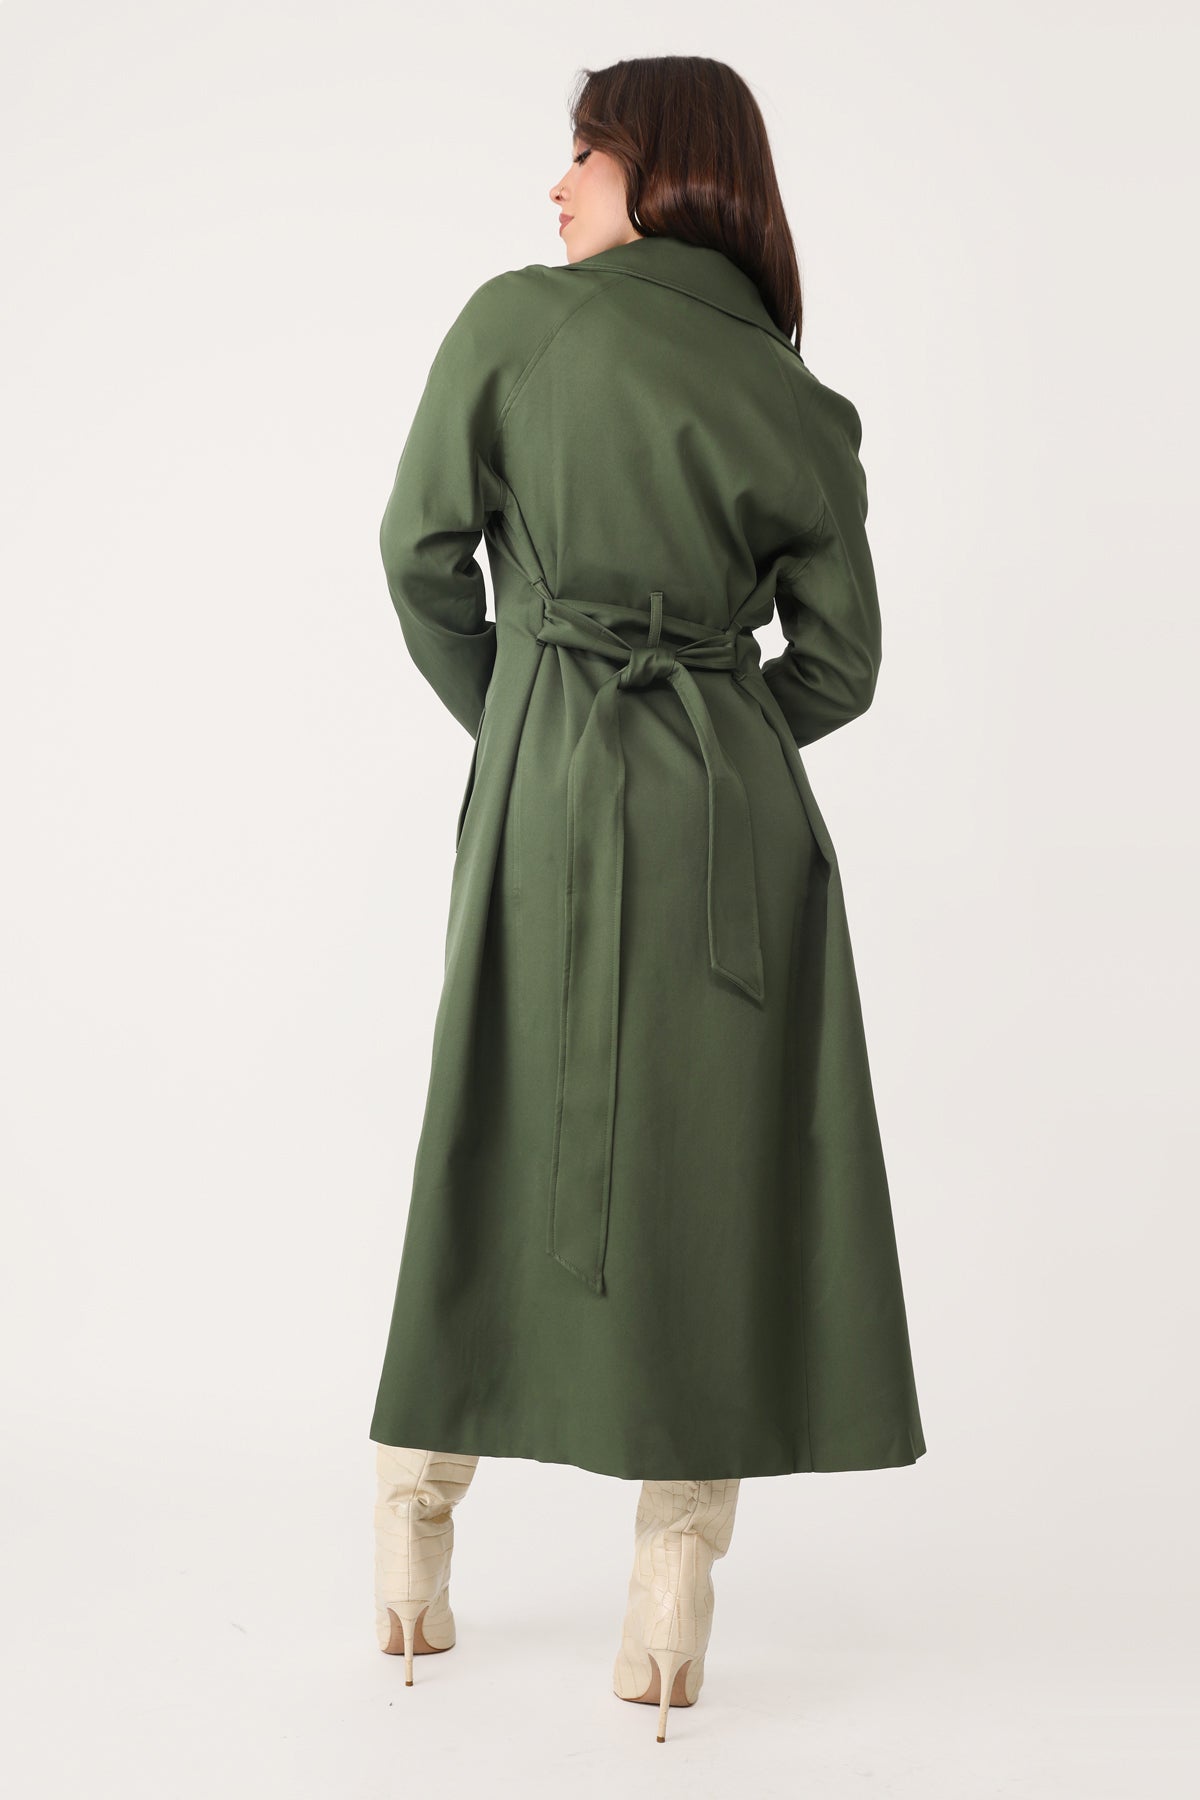 MAKING MOVES GREEN TRENCH COAT